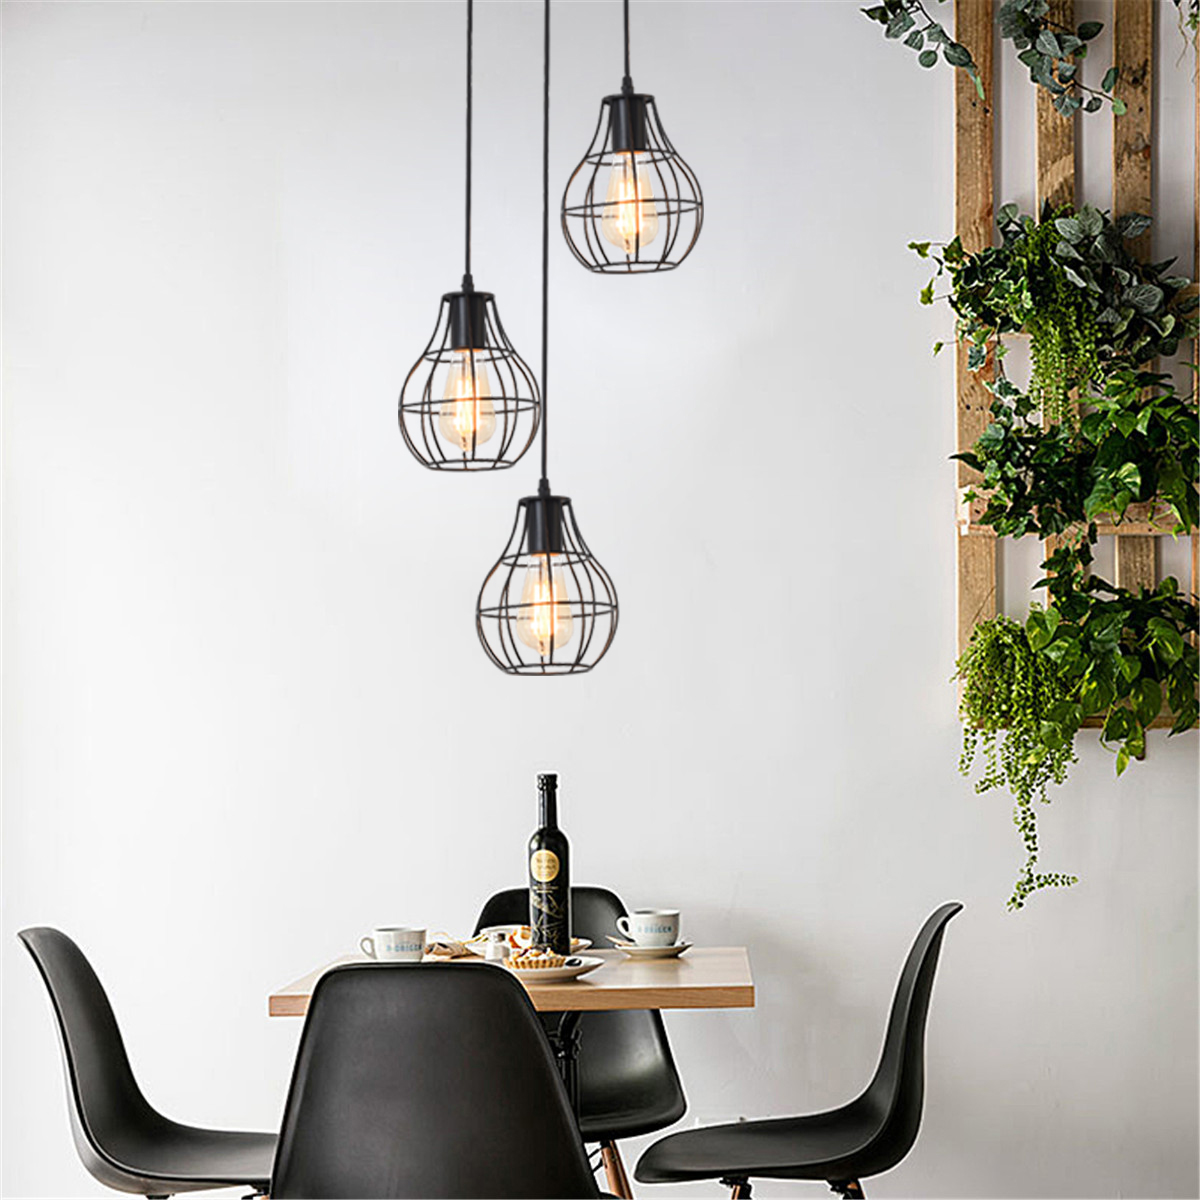 3-Lights-Industrial-Pendant-Lighting-Ceiling-Metal-Vintage-Hanging-Retro-Lamp-Without-Bulb-1710143-3